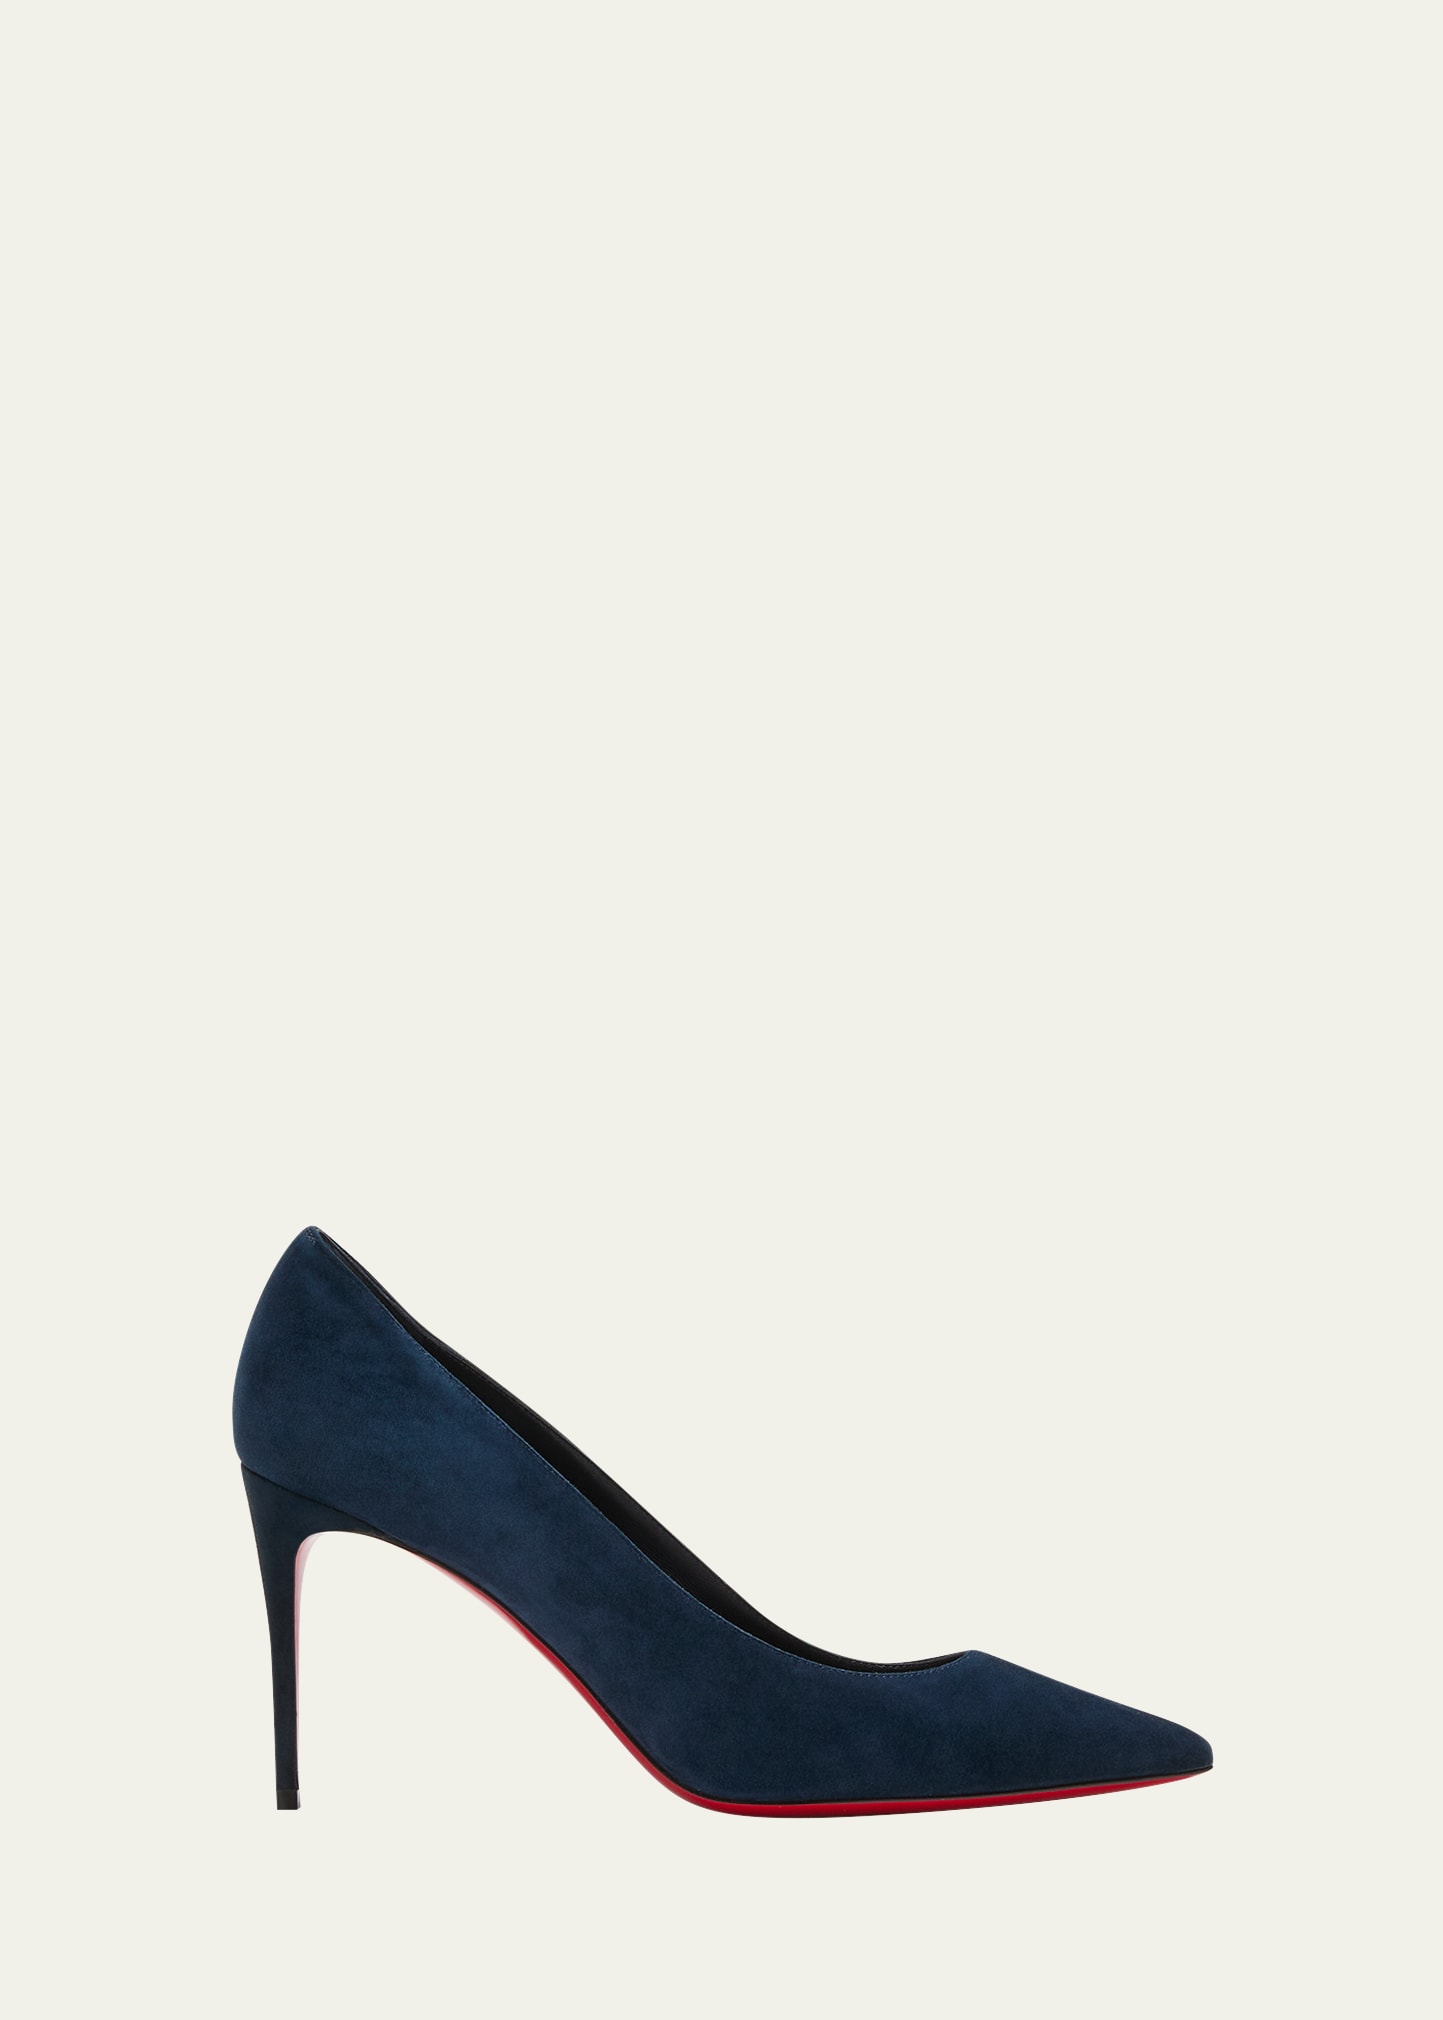 Kate Suede Red Sole Classic Pumps